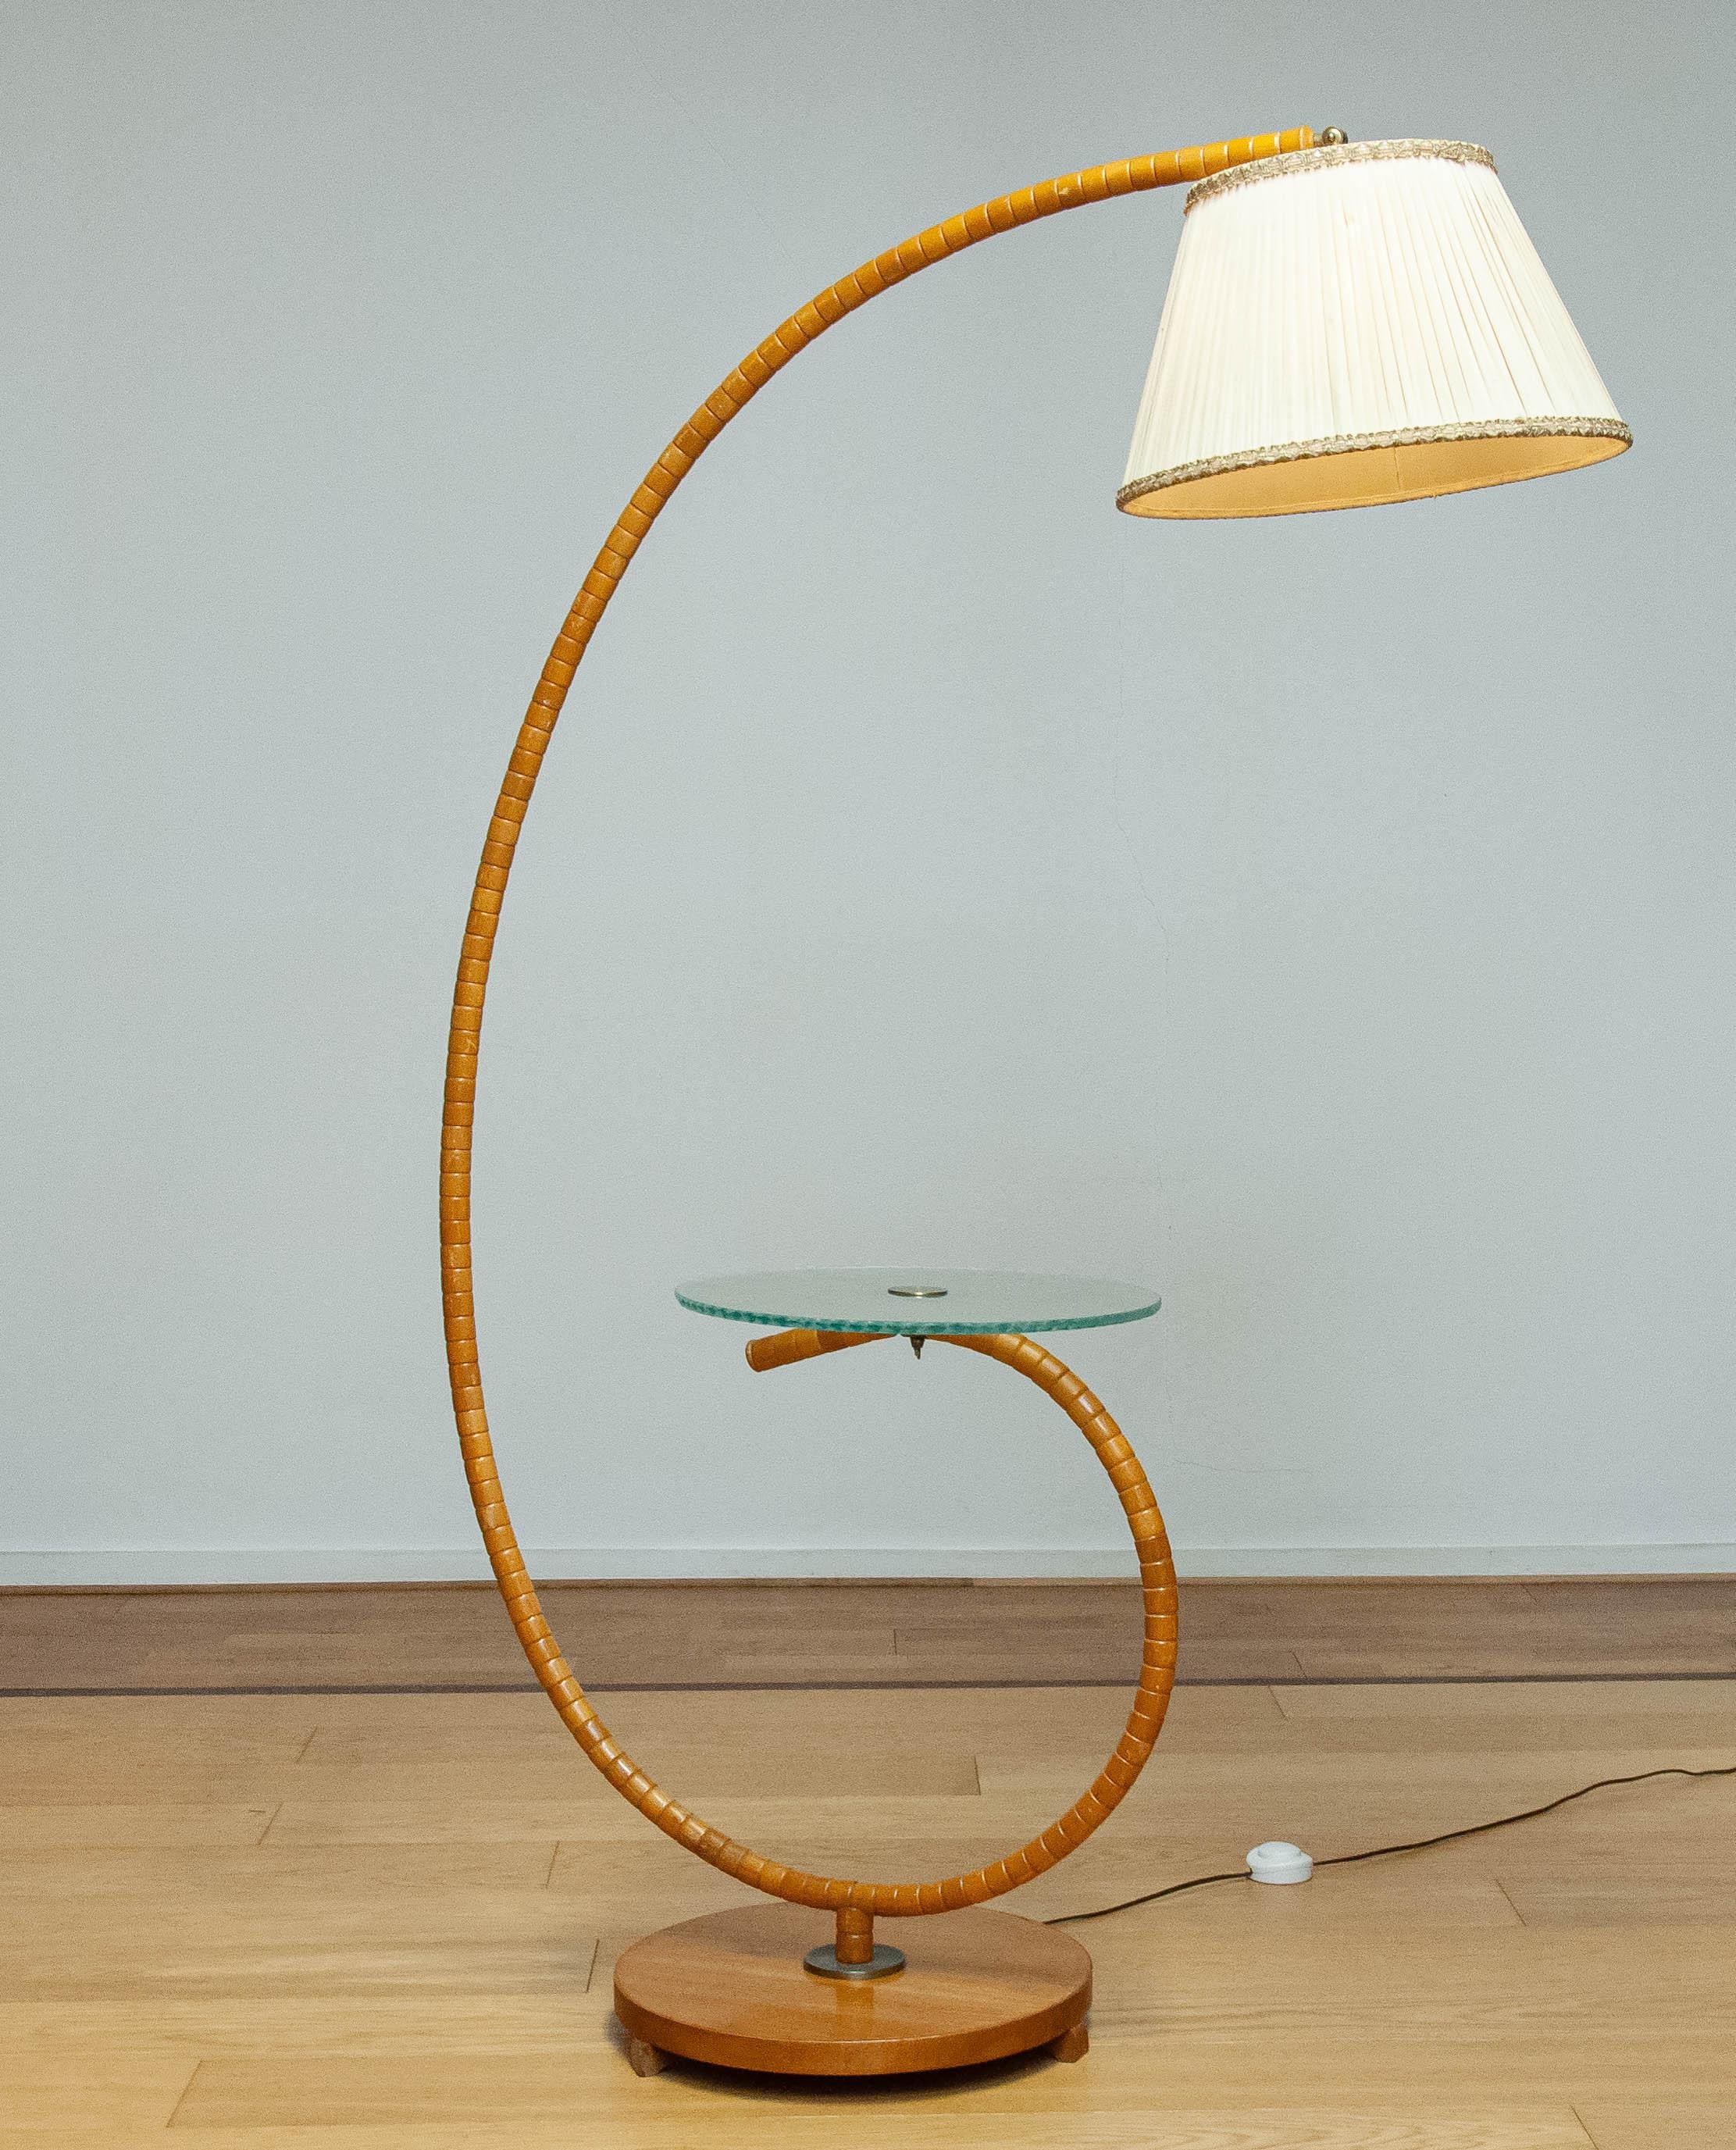 1940 Swedish Art Nouveau Floor Lamp In Elm With Art Glass Table By IWO Mariestad For Sale 3